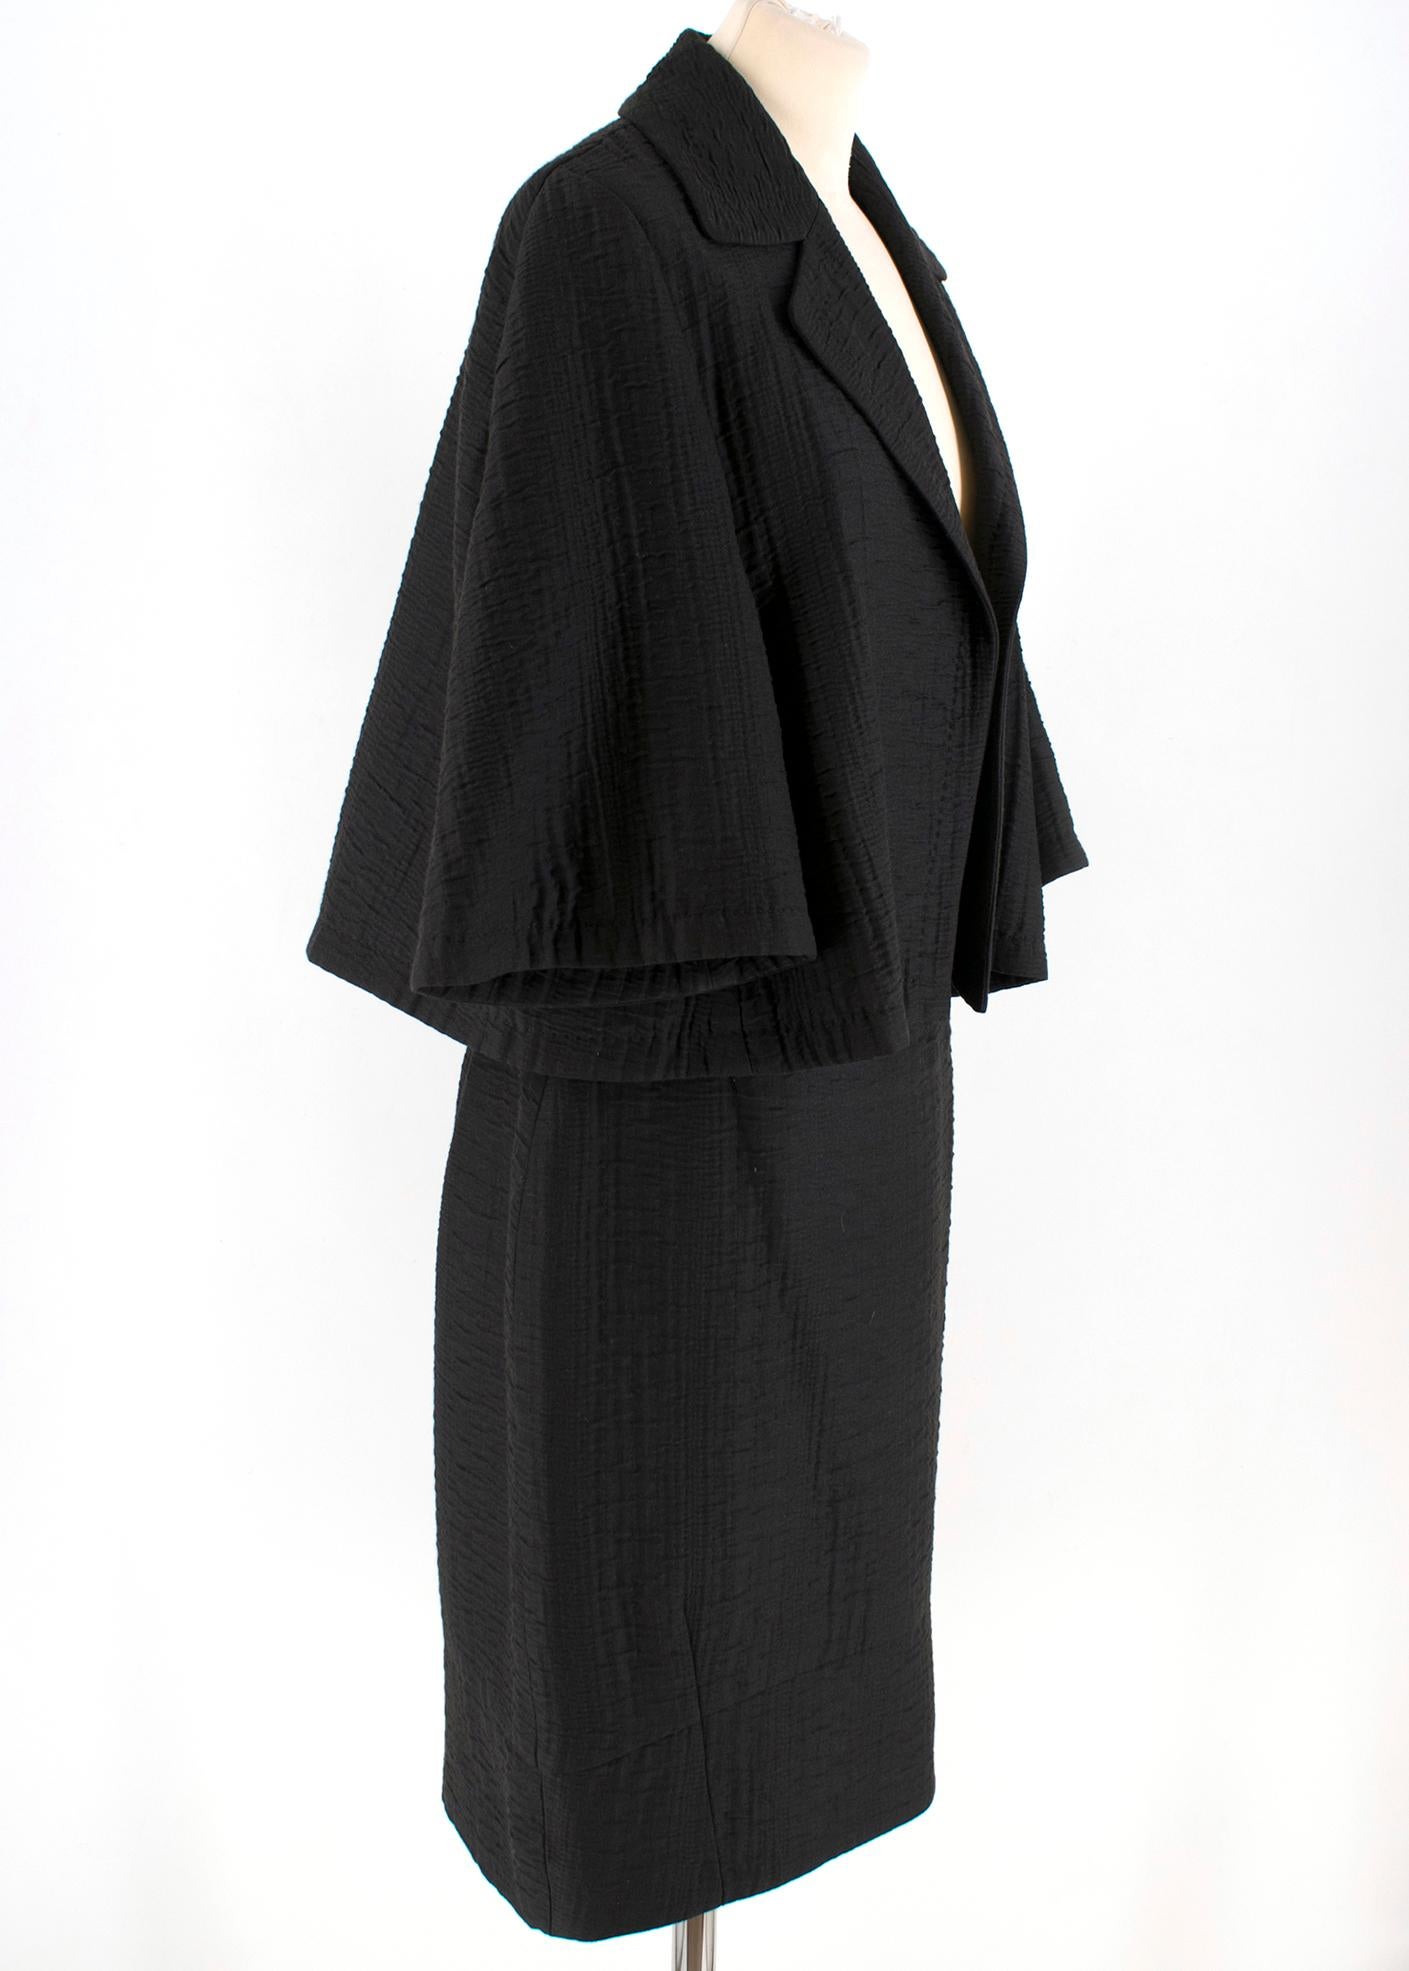 Escada Black Textured Jacket & Skirt

Blazer Jacket:

- This finely textured blazer jacket is a cropped piece with flared short sleeves with wide notched lapels
- NO button fastening (open)

Skirt:

- Tube shaped skirt, 
- Black cotton textured